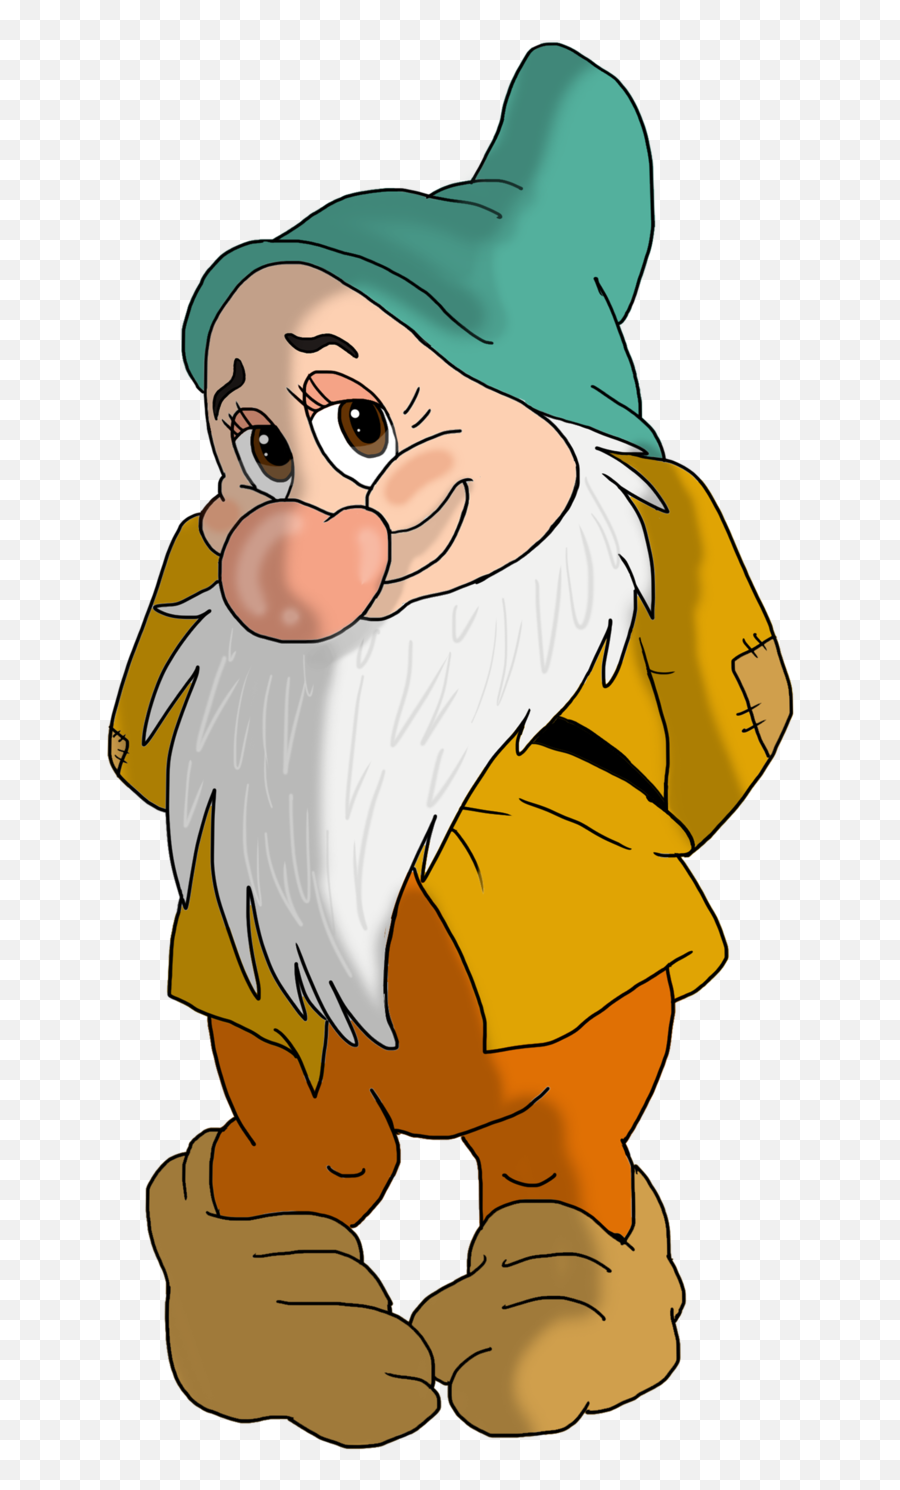 Good Gnome As A Picture For Clipart - Bashful Dwarf Snow White Emoji,Gnome Clipart